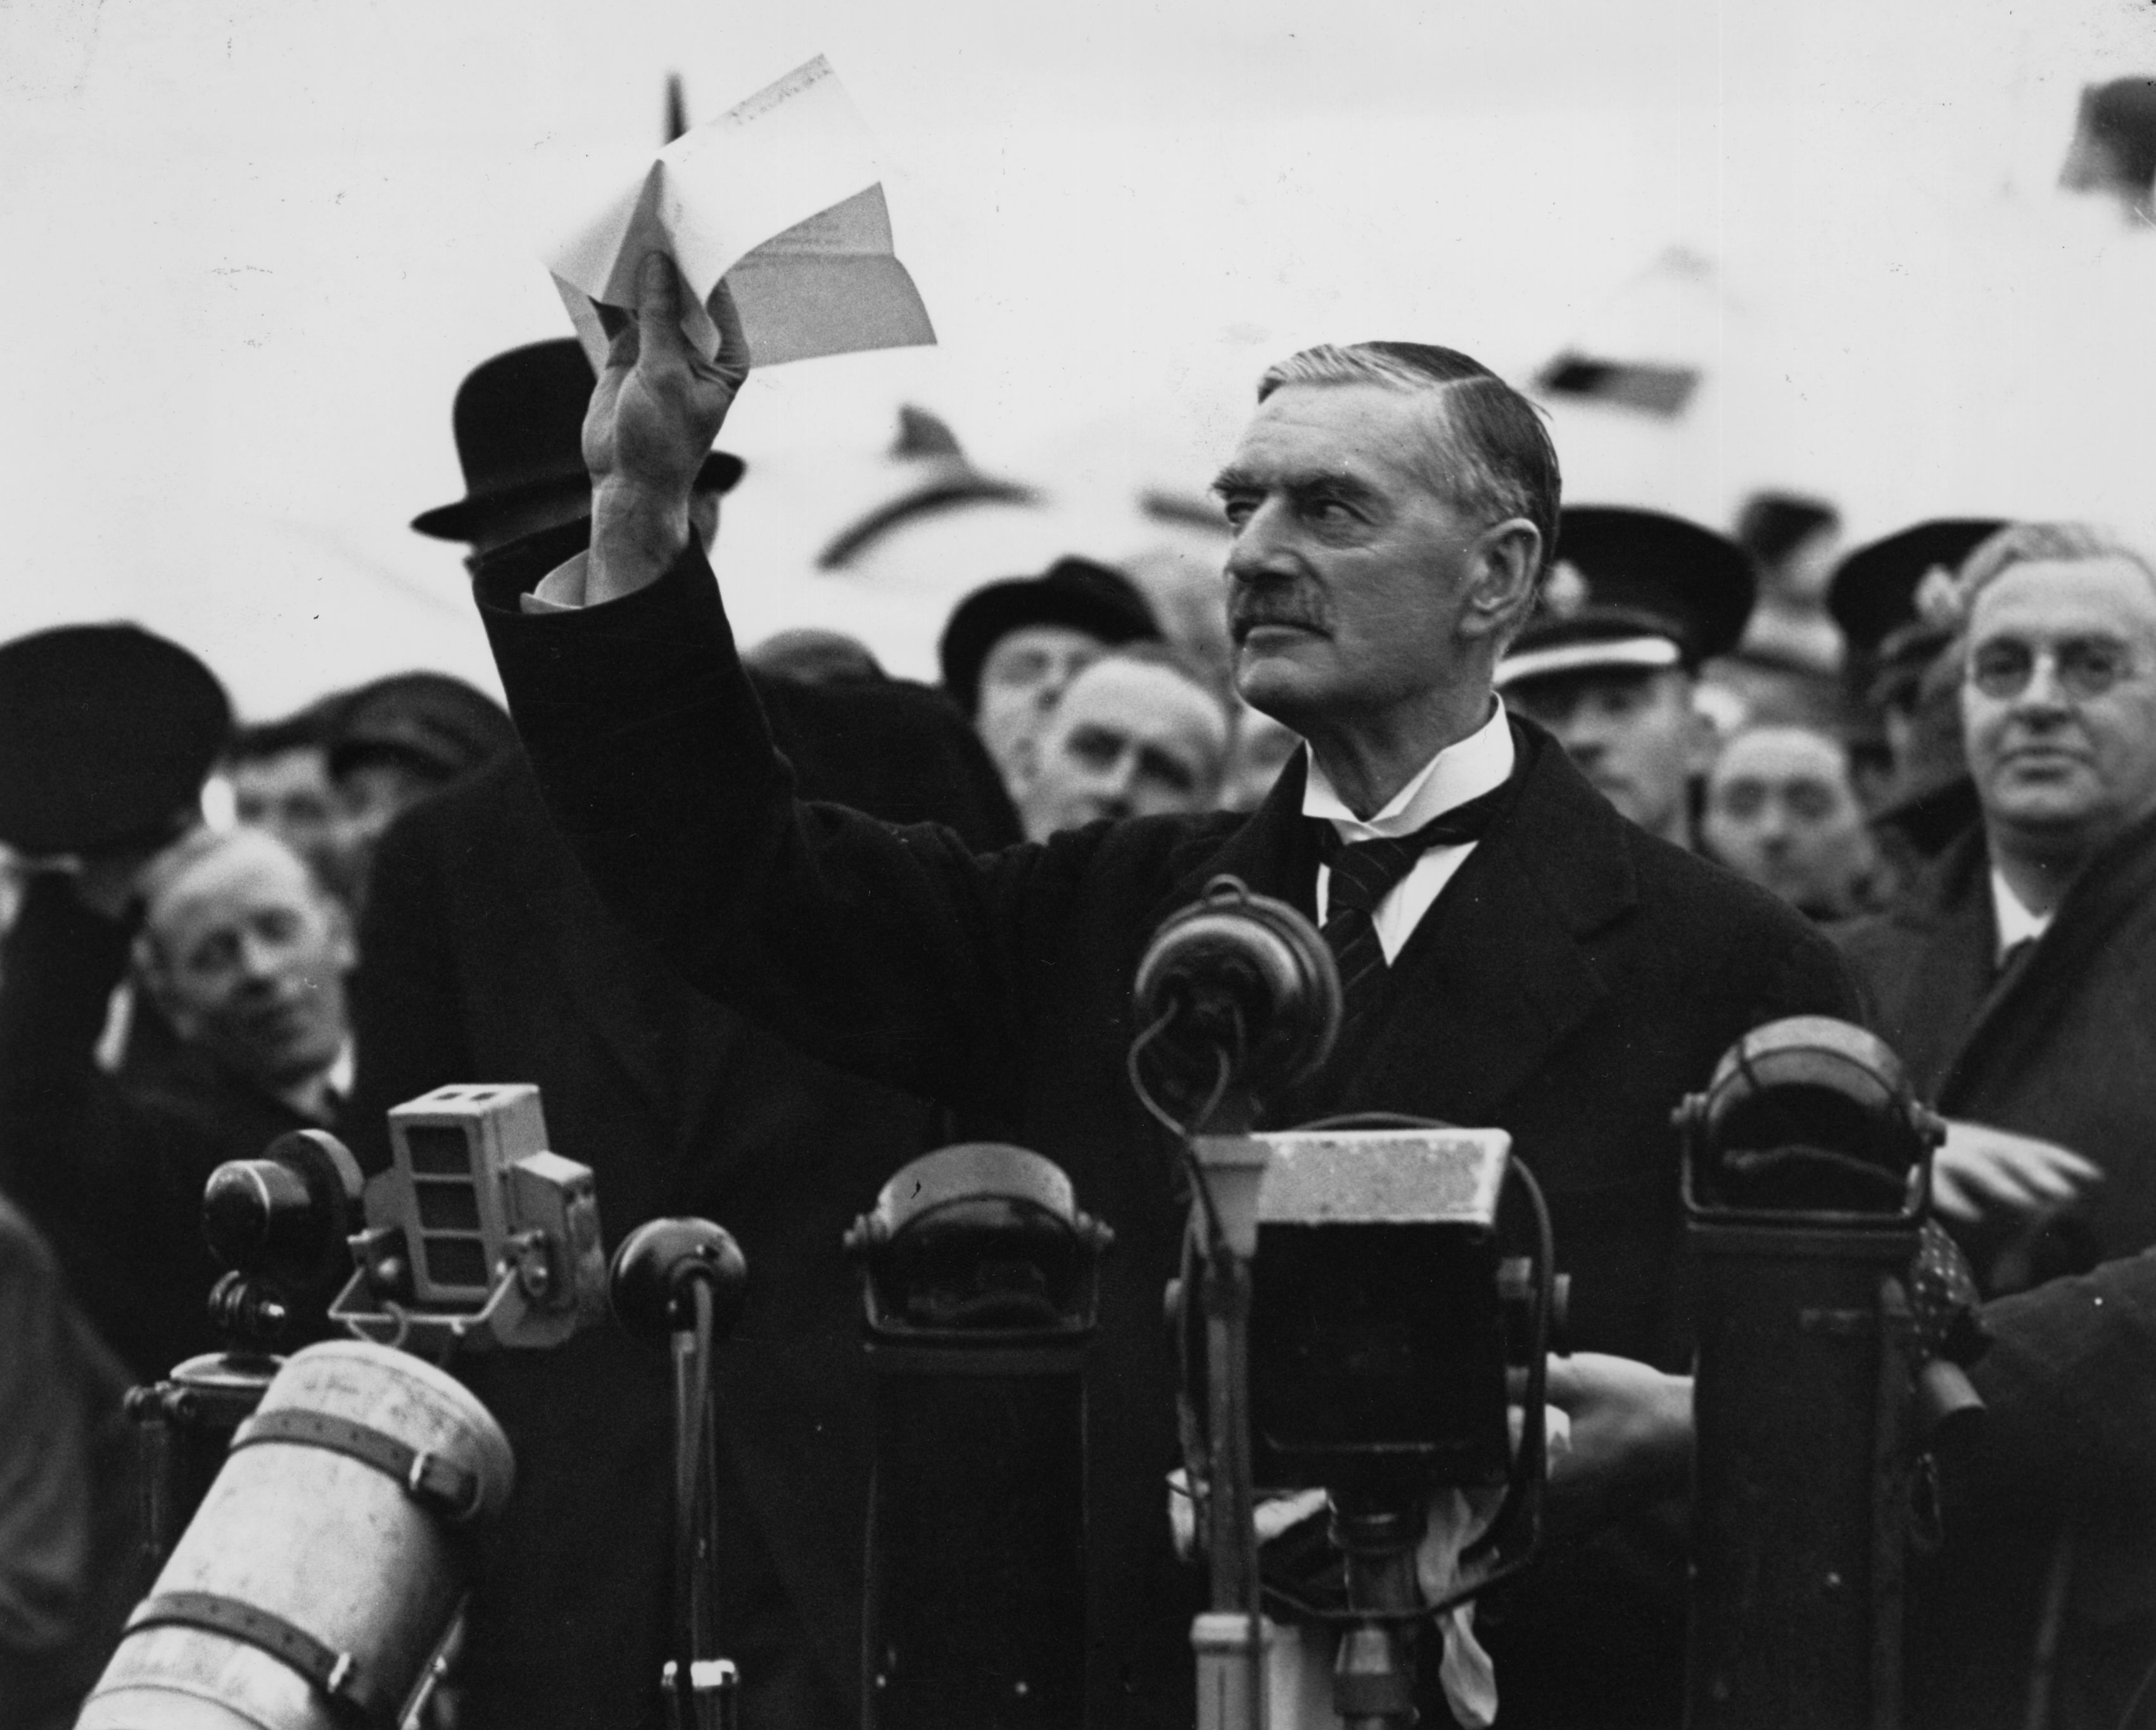 Prime Minister Neville Chamberlain delivers his famous “Peace for our time” speech on September 30, 1938